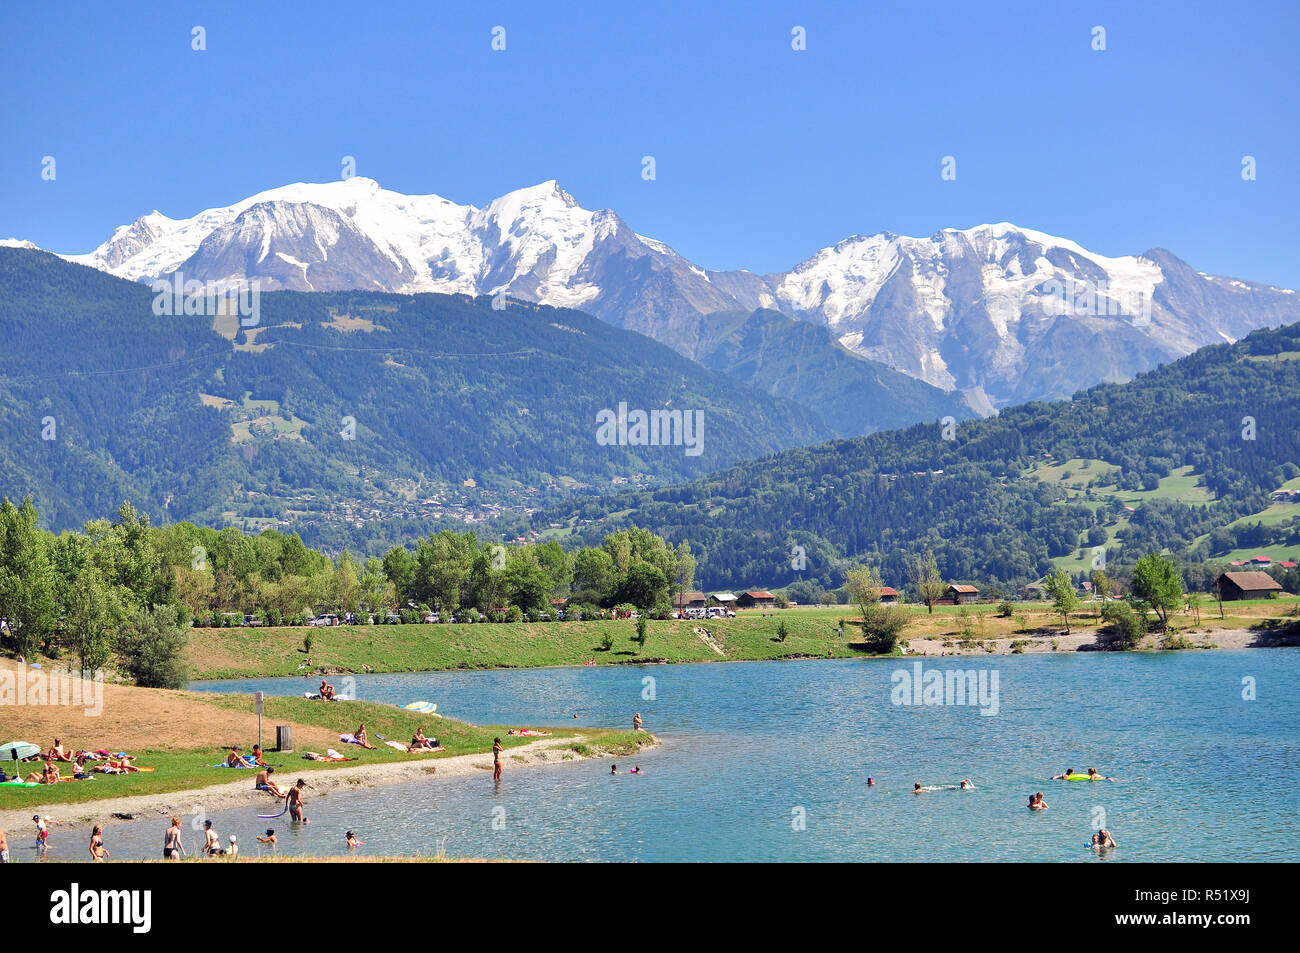 PASSY, FRANCE - AUGUST 13: People swimming in Passy lake, french Alps on August 13, 2015. Stock Photo